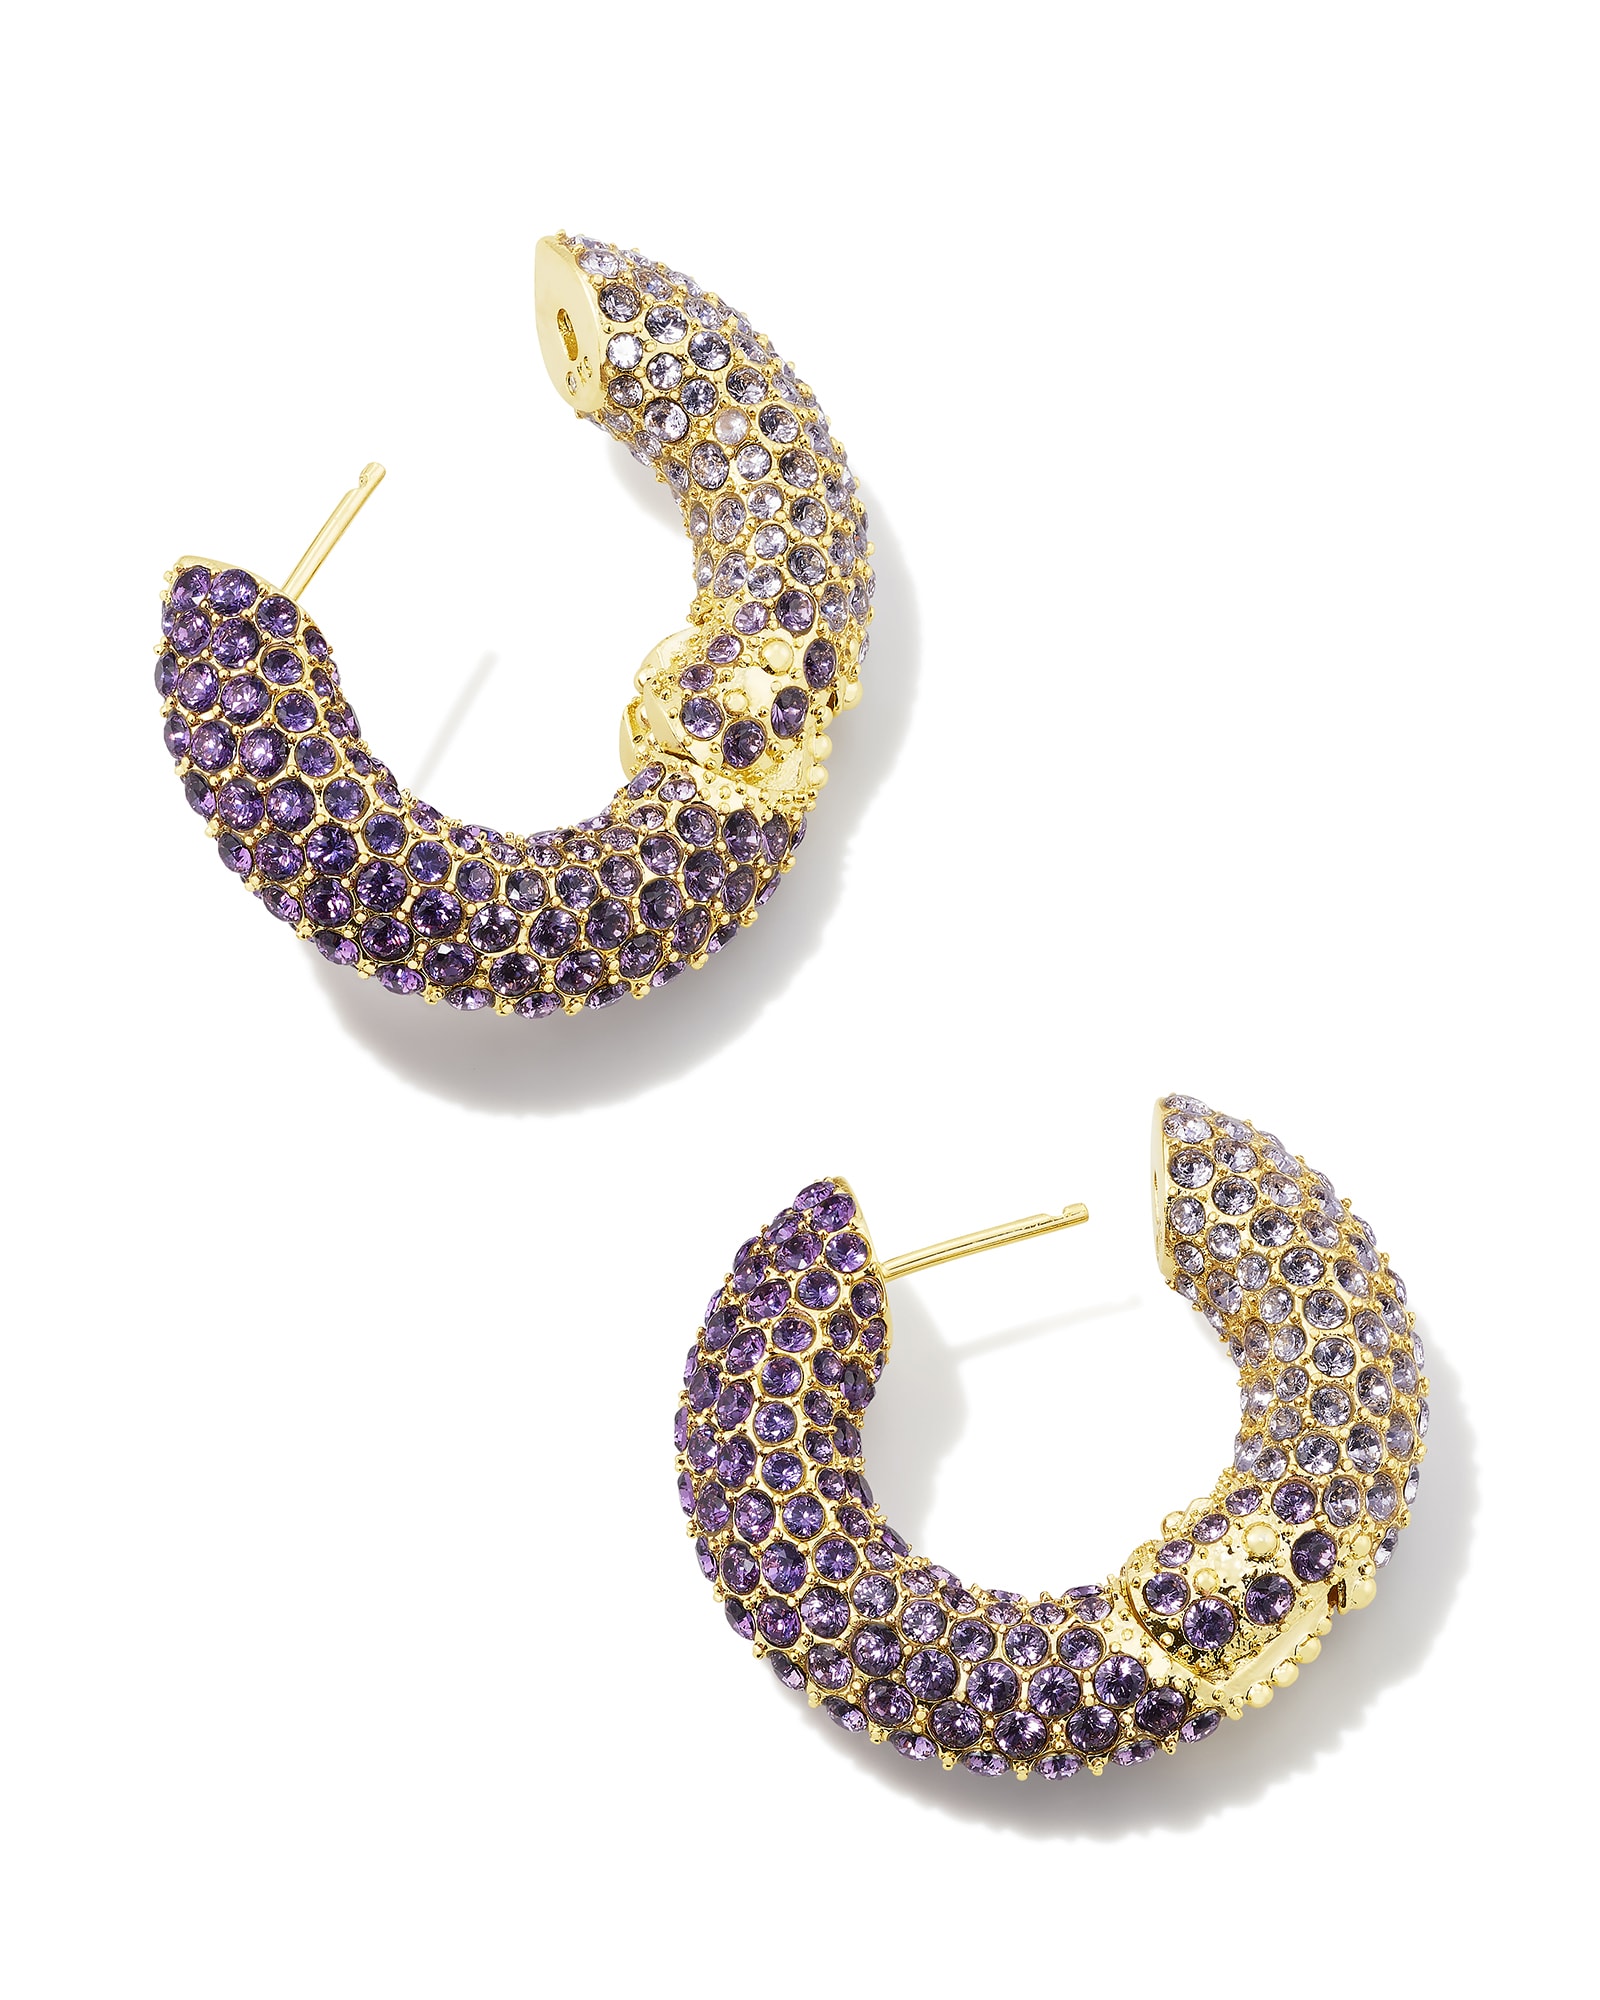 Photos - Earrings KENDRA SCOTT Mikki Gold Pave Hoop  in Purple Mauve Ombre Mix | Cry 